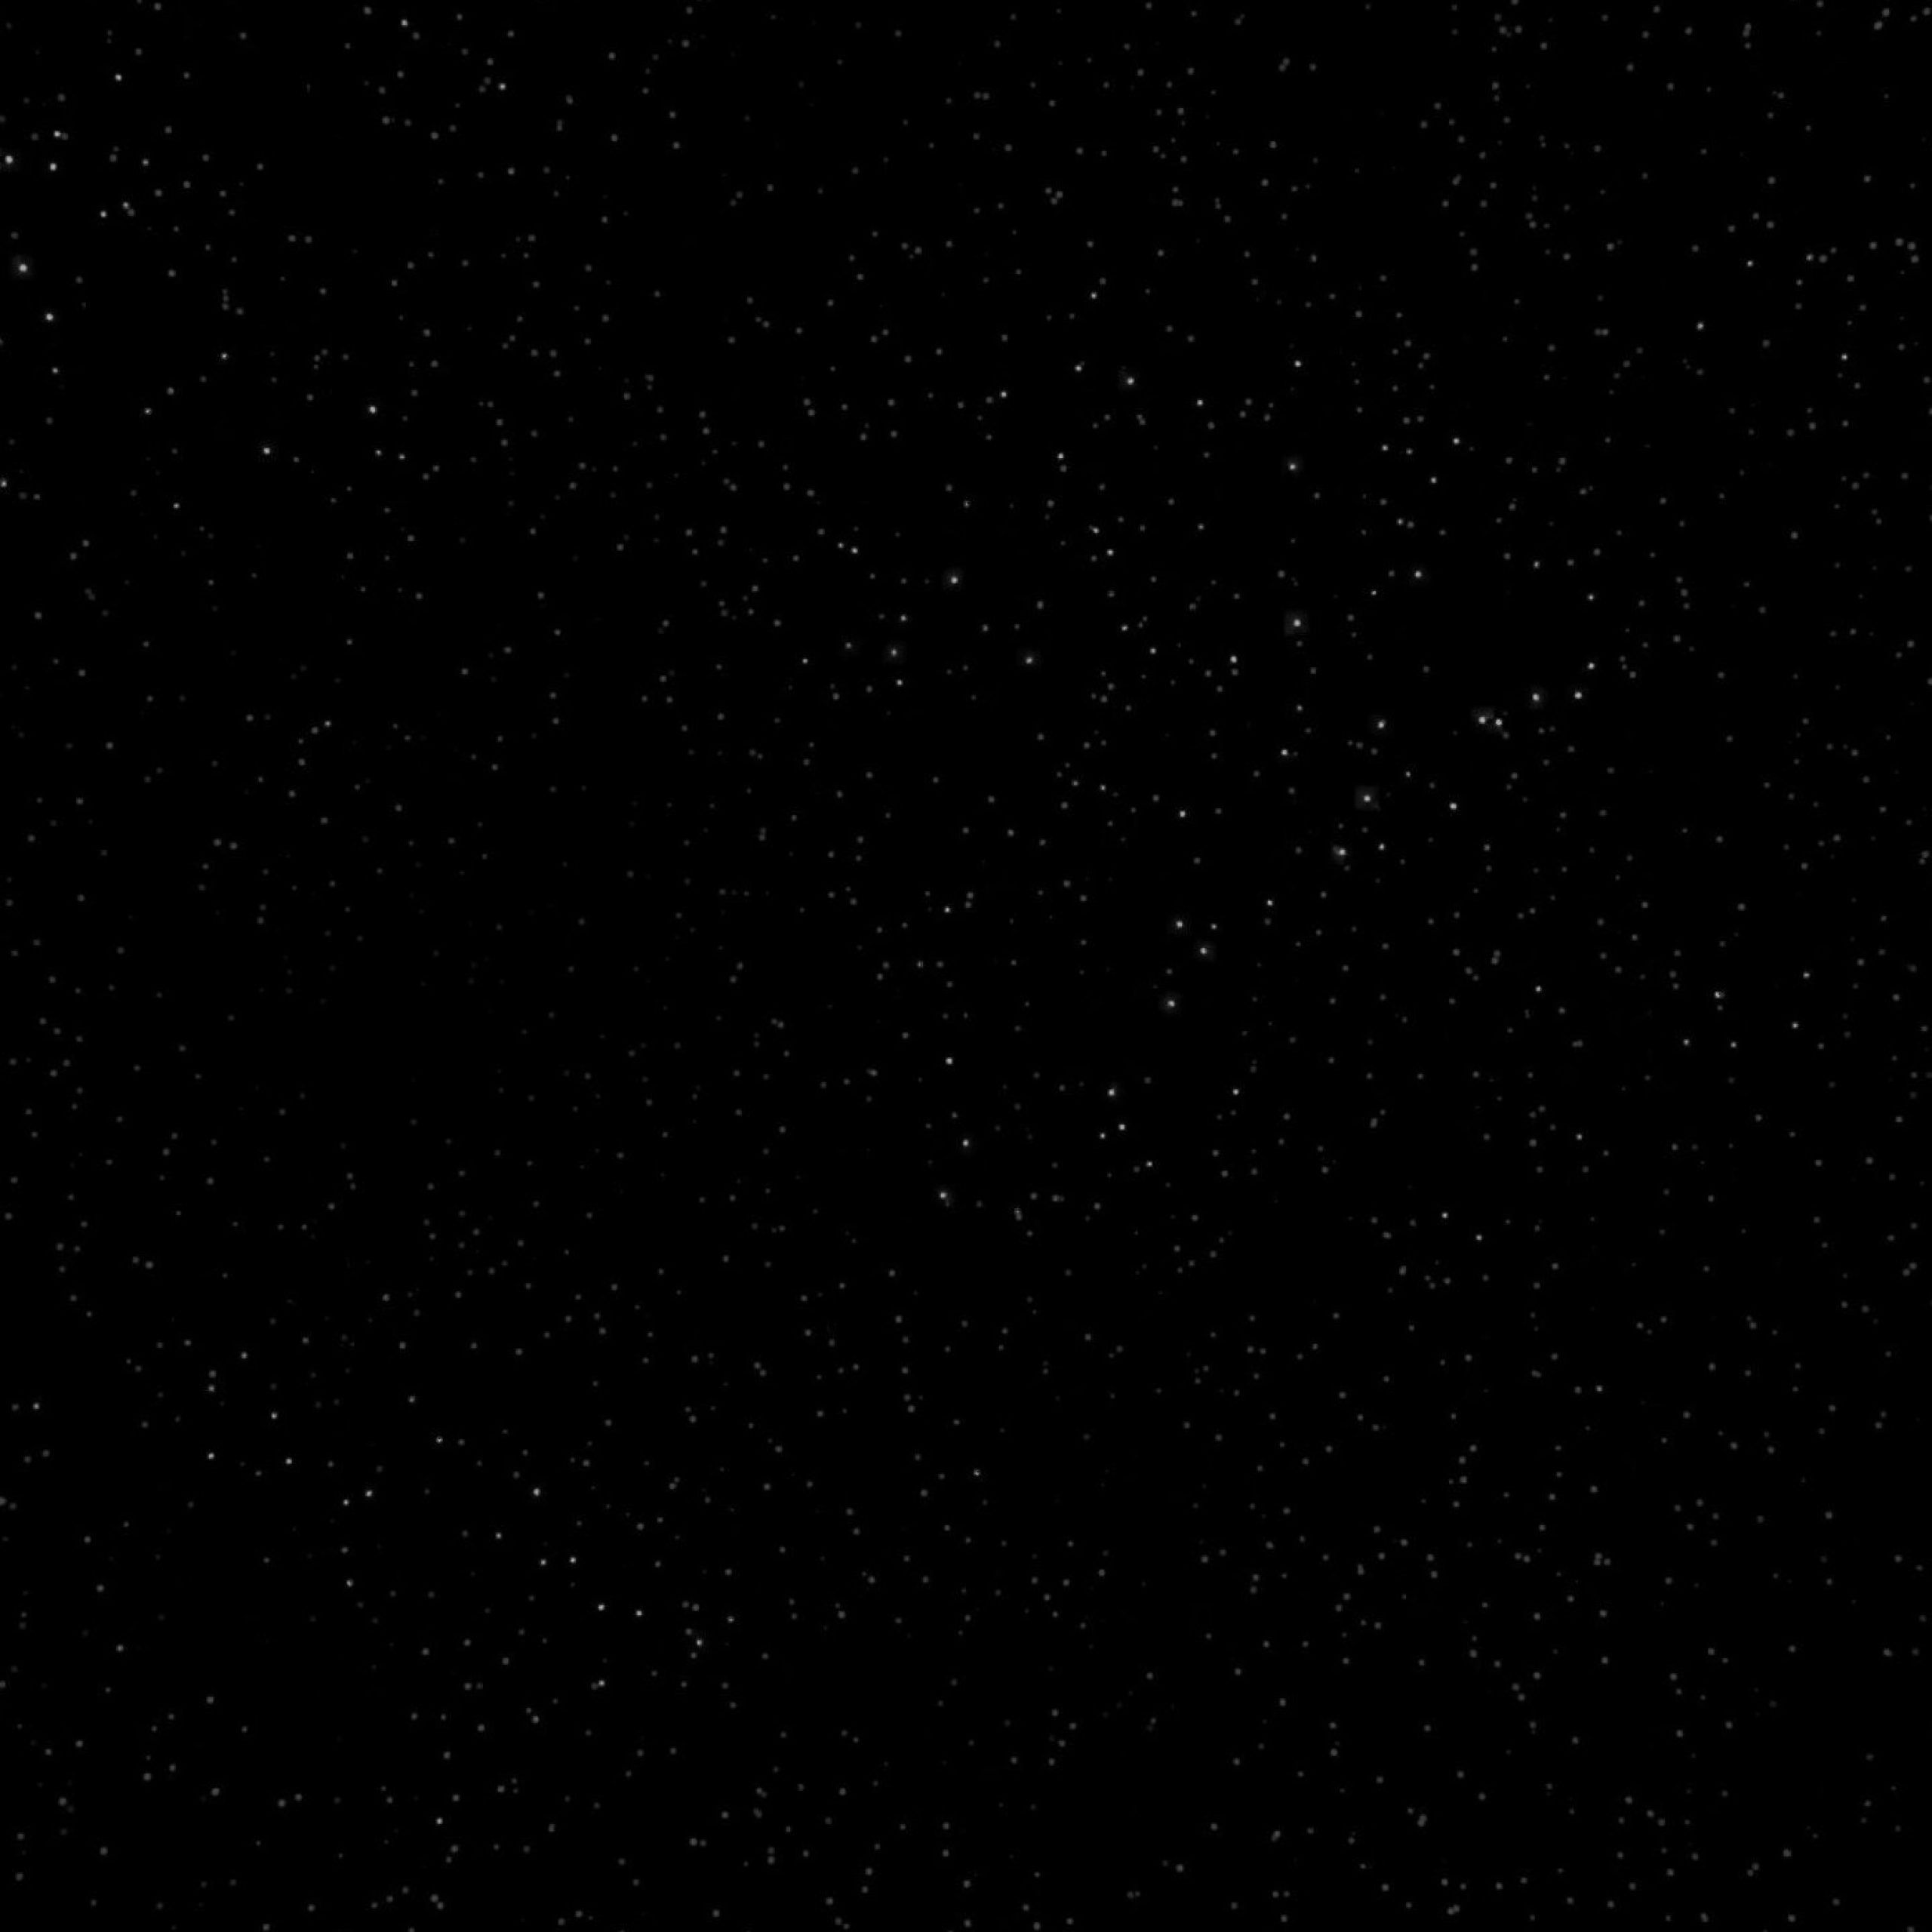 iPhone X True Black Wallpaper.GiftWatches.CO